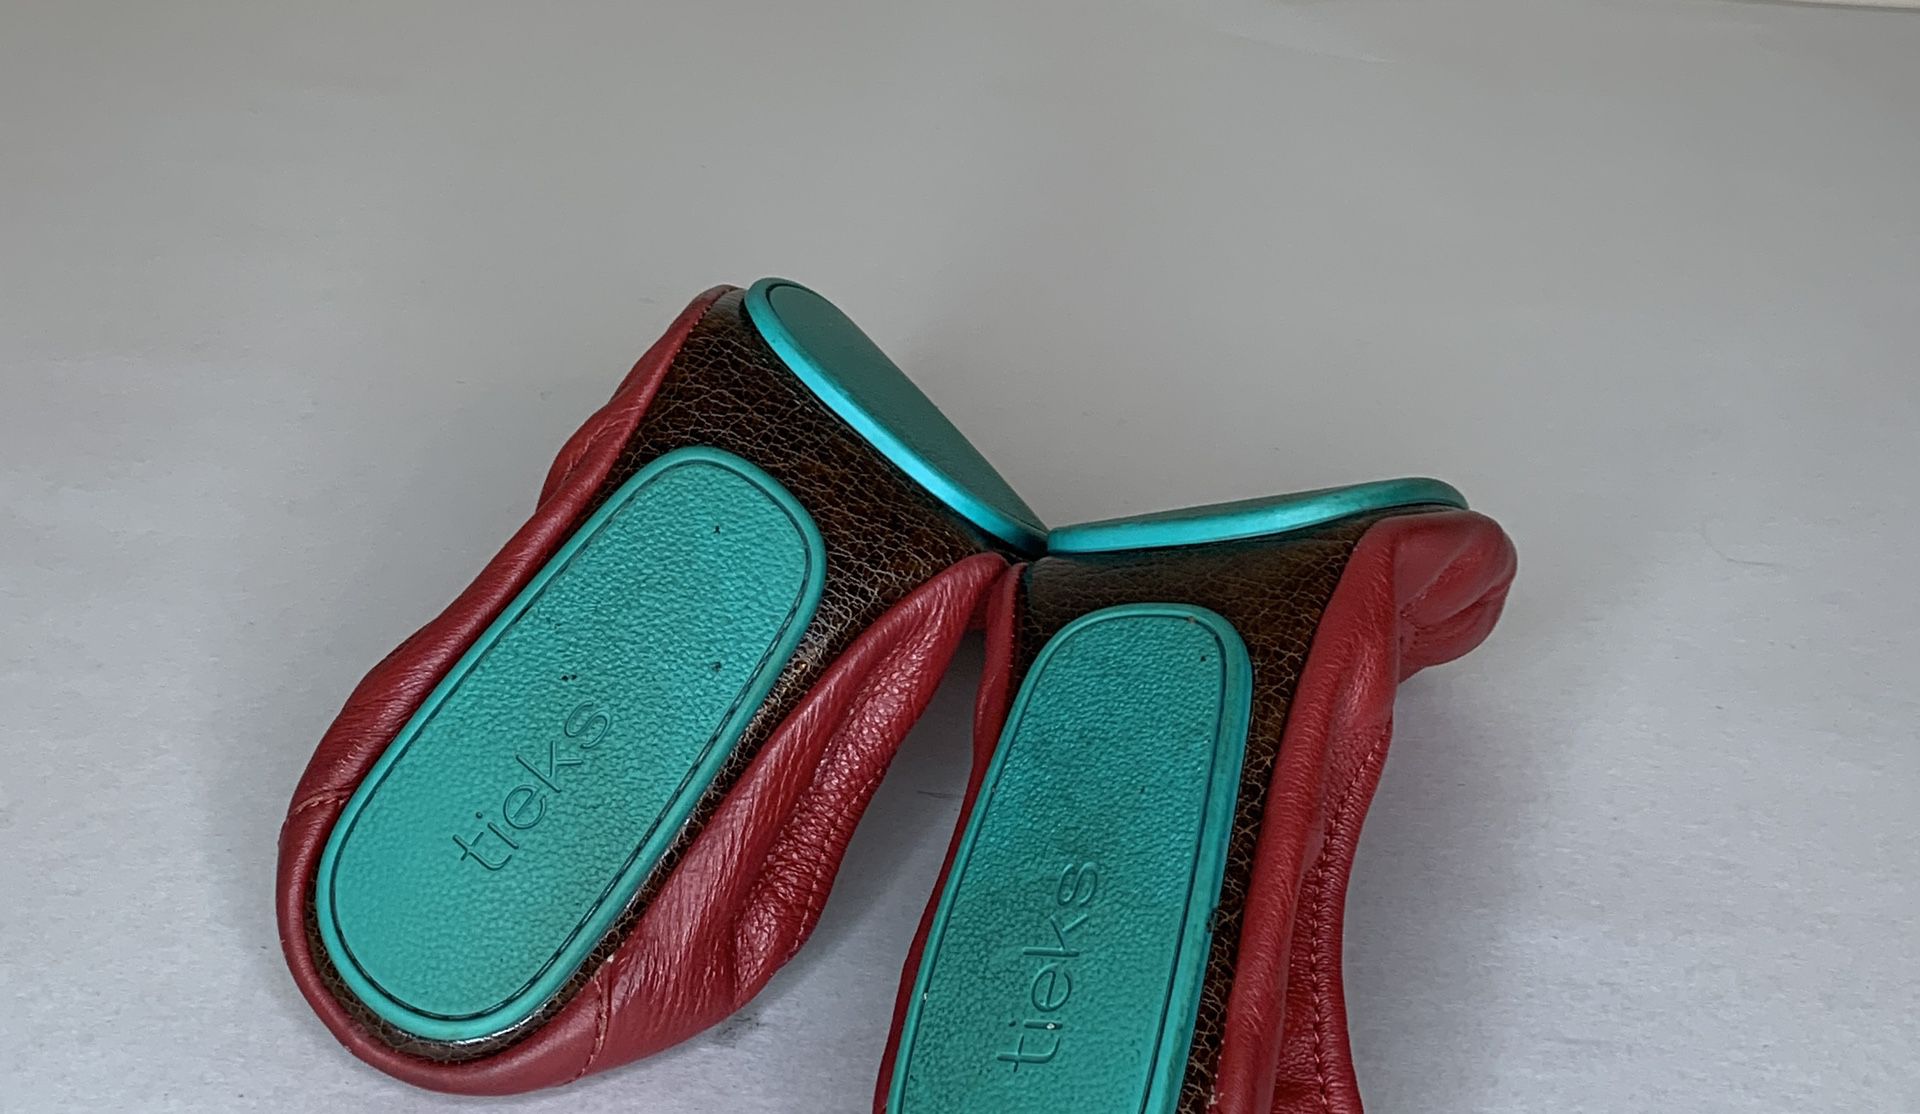 Tieks by Gavrieli Foldable Ballet Flats Size 8 in Cardinal Red Pre-Owned